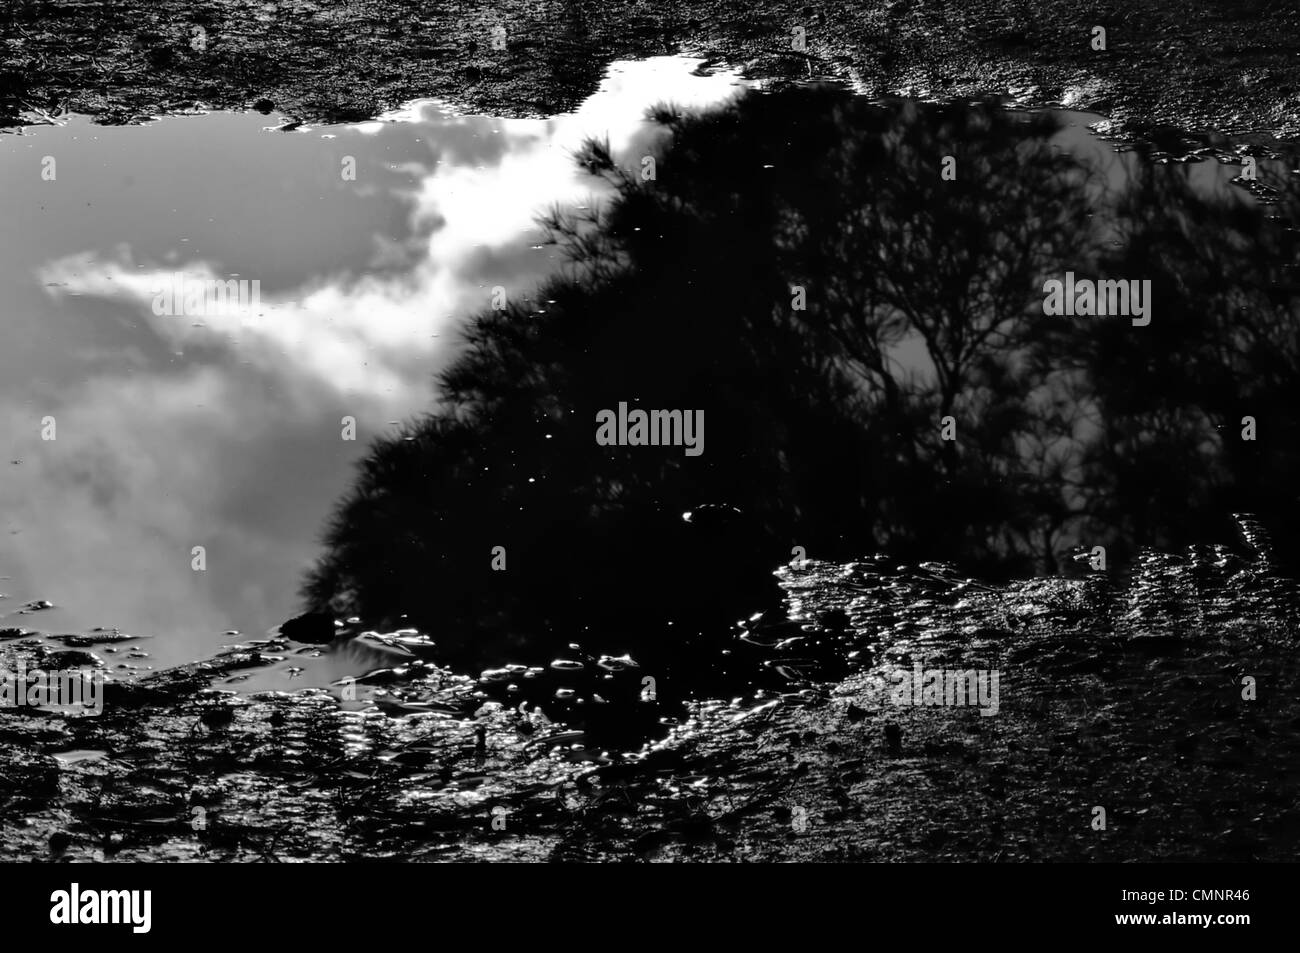 Trees and moody sky reflected in muddy water. Black and white. Stock Photo